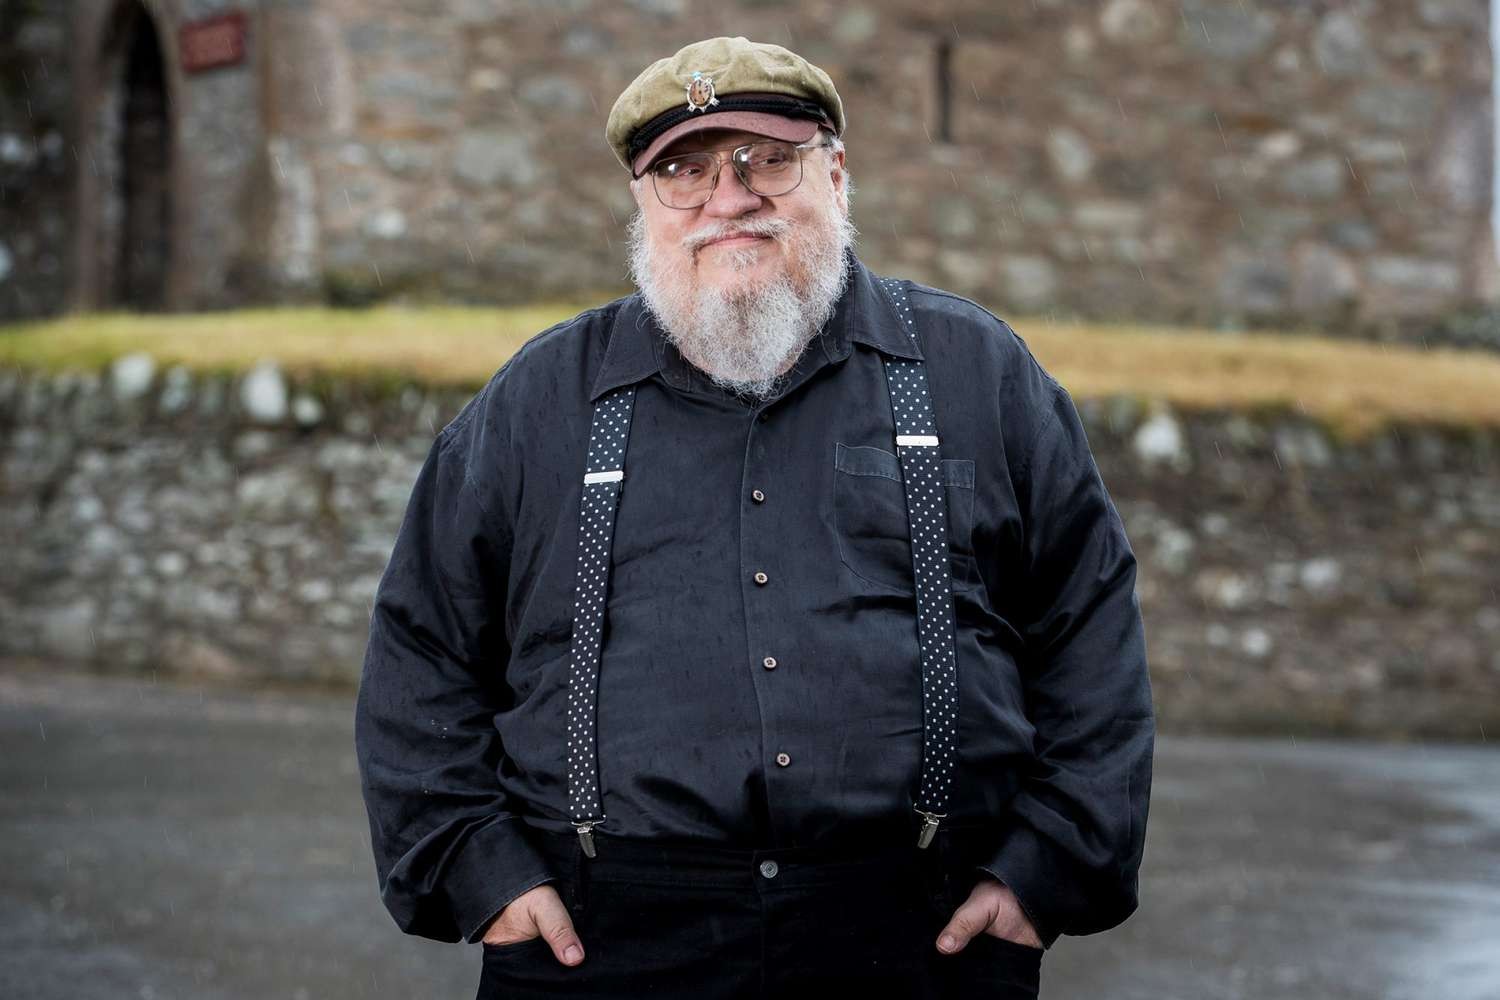 George R. R. Martin responds to the common criticism he gets for A Song of Fire and Ice